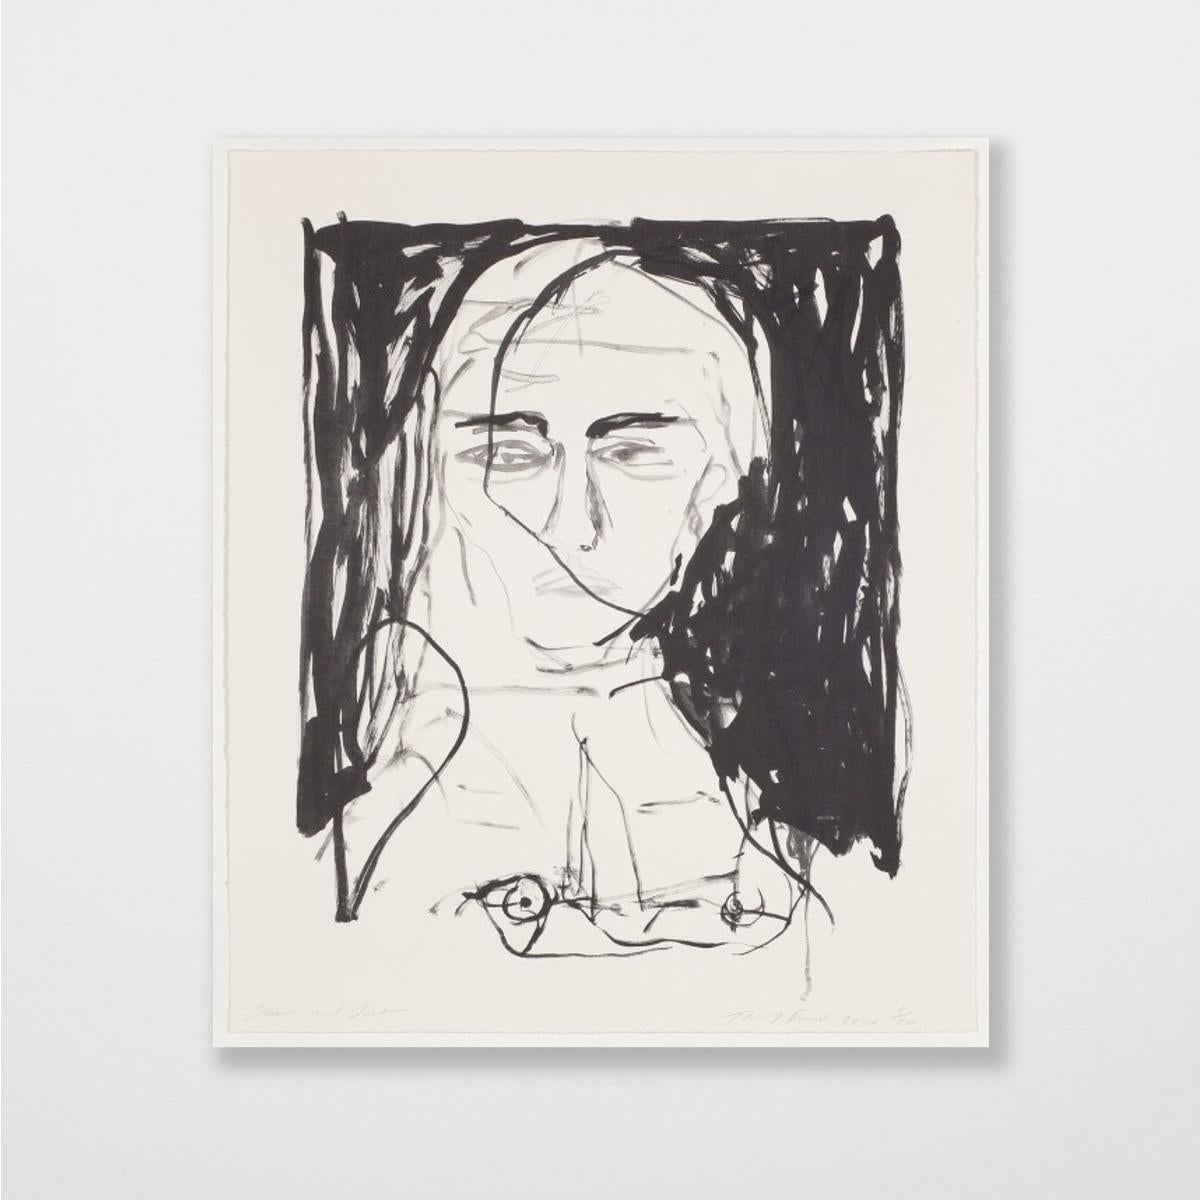 Over and Out - Emin, Contemporary, YBAs, Lithograph, Black, Portrait - Young British Artists (YBA) Print by Tracey Emin